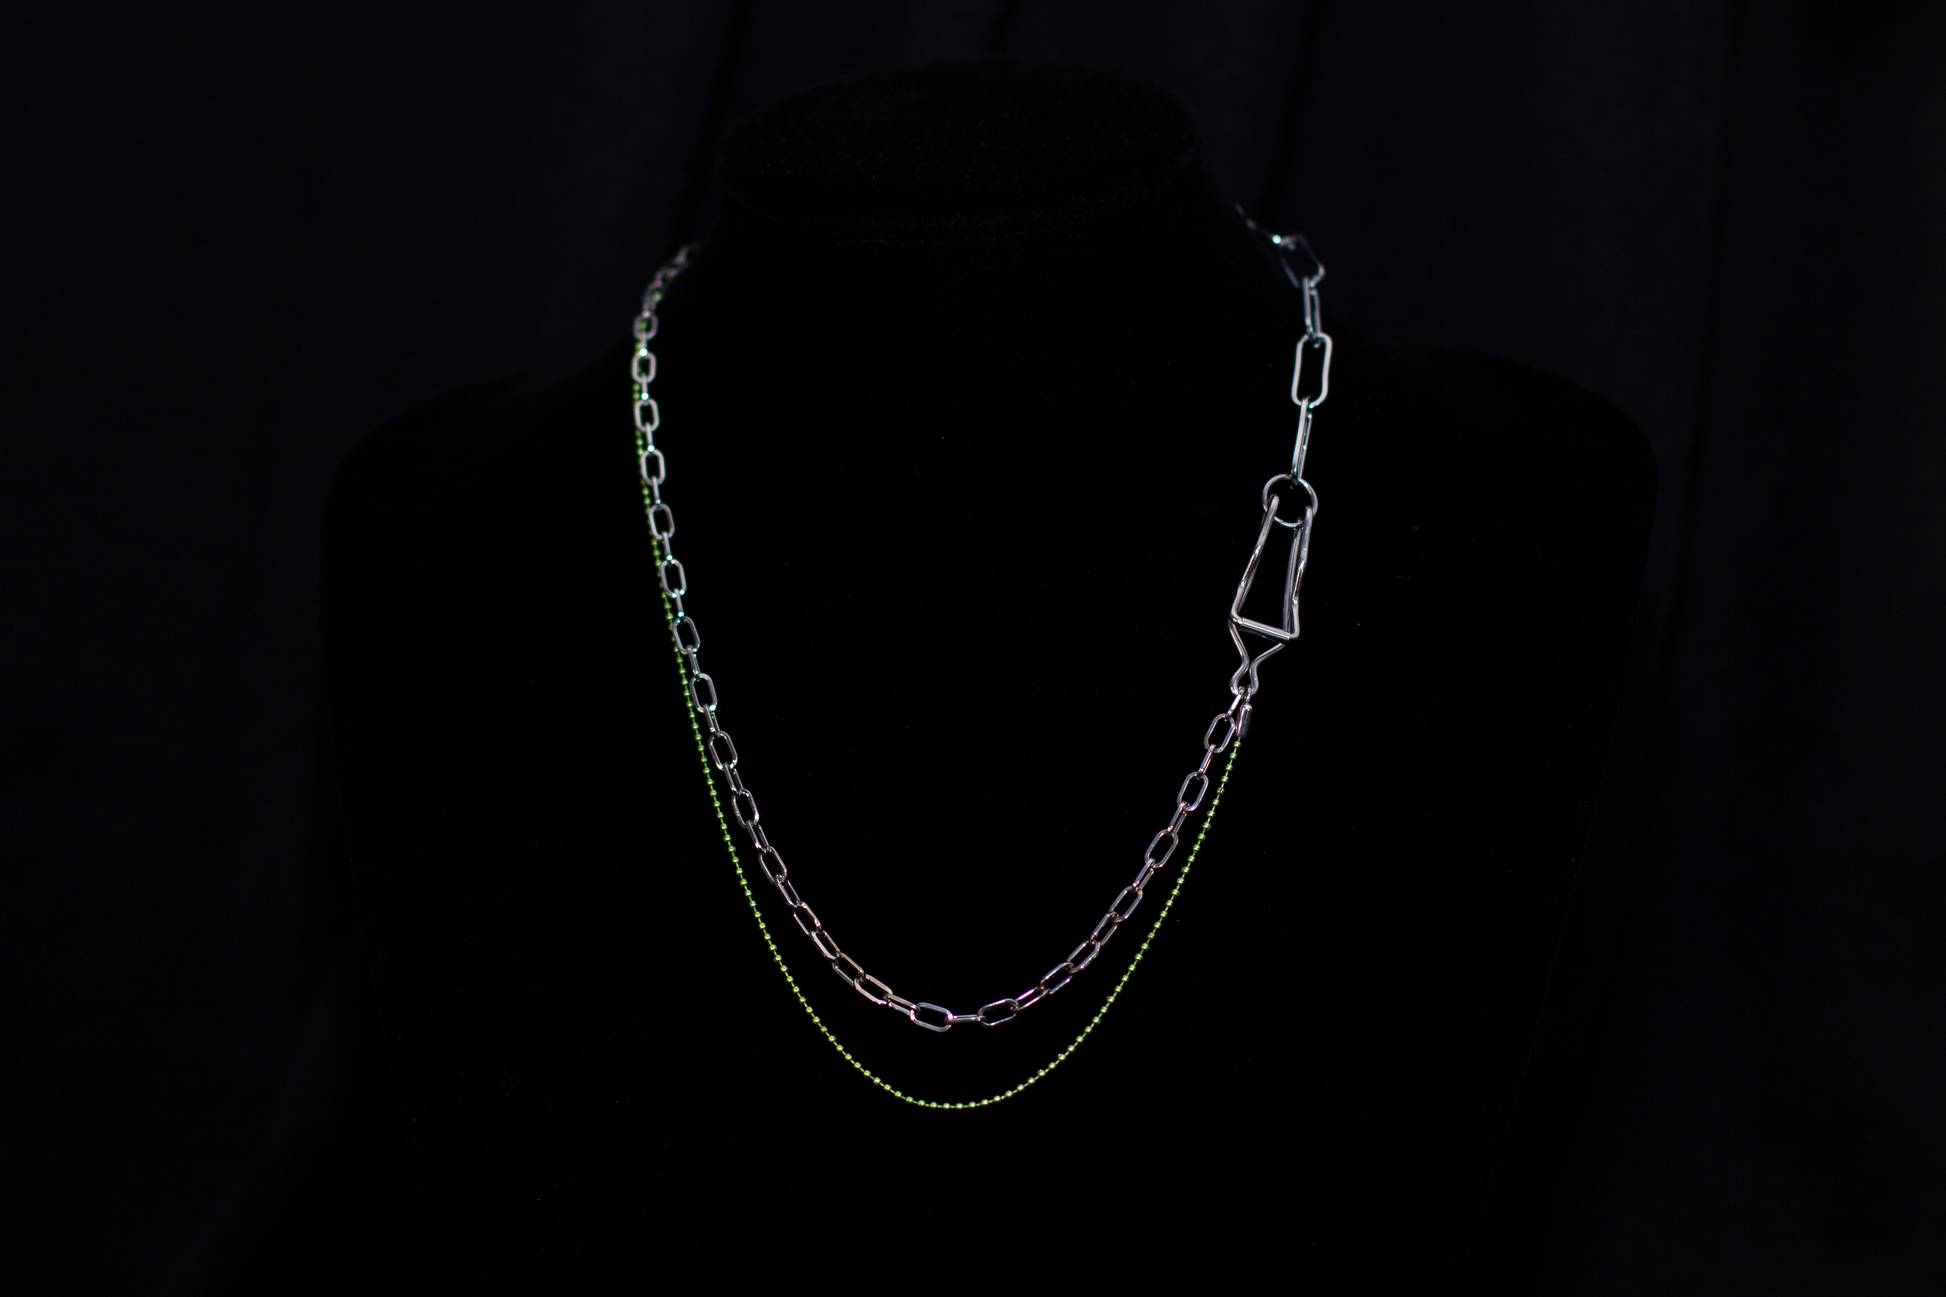  This image showcases a Myril Jewels punk-inspired silver and green chain necklace, artfully displayed on a dark mannequin. The necklace features a mix of classic and oversized links, with a striking green hue that adds a pop of color to the overall dark-avantgarde aesthetic. It's a versatile piece that aligns with neo-gothic trends and caters to gothic, whimsigoth, and witchcore styles, making it a fitting accessory for Halloween, everyday minimal goth fashion, rave parties